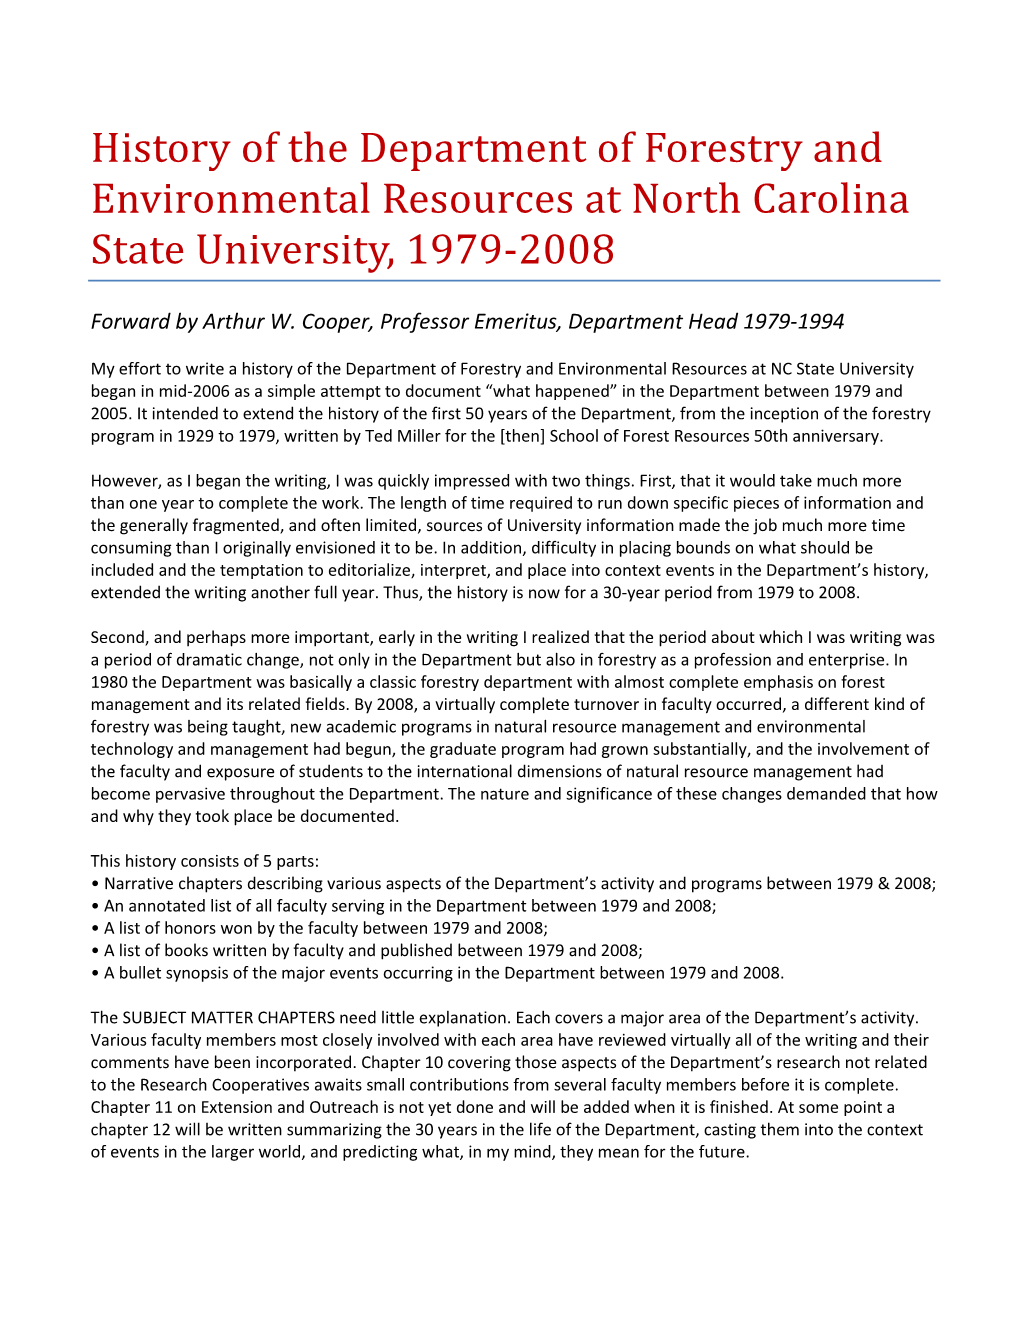 History of the Department of Forestry and Environmental Resources at North Carolina State University, 1979-2008